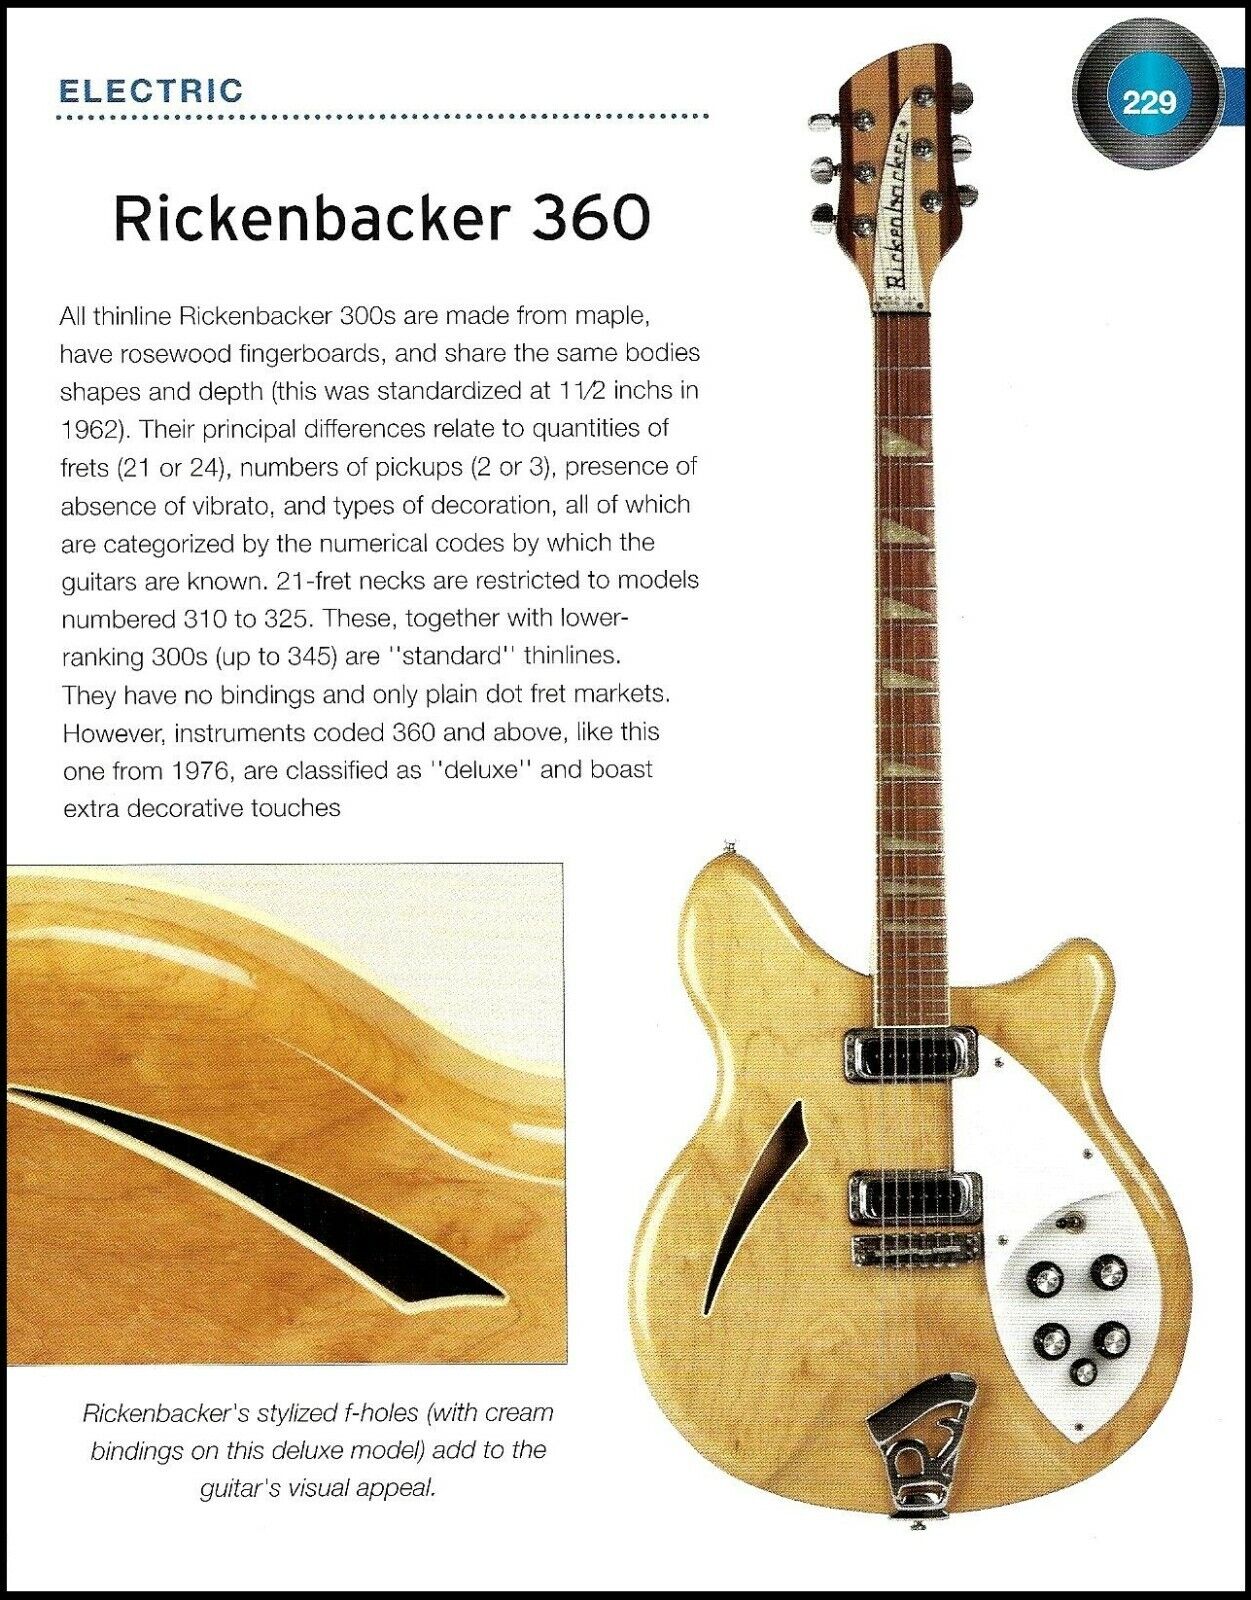 The 1976 Rickenbacker 360 + the 360/12VP 12-string guitar 6 x 8 history article